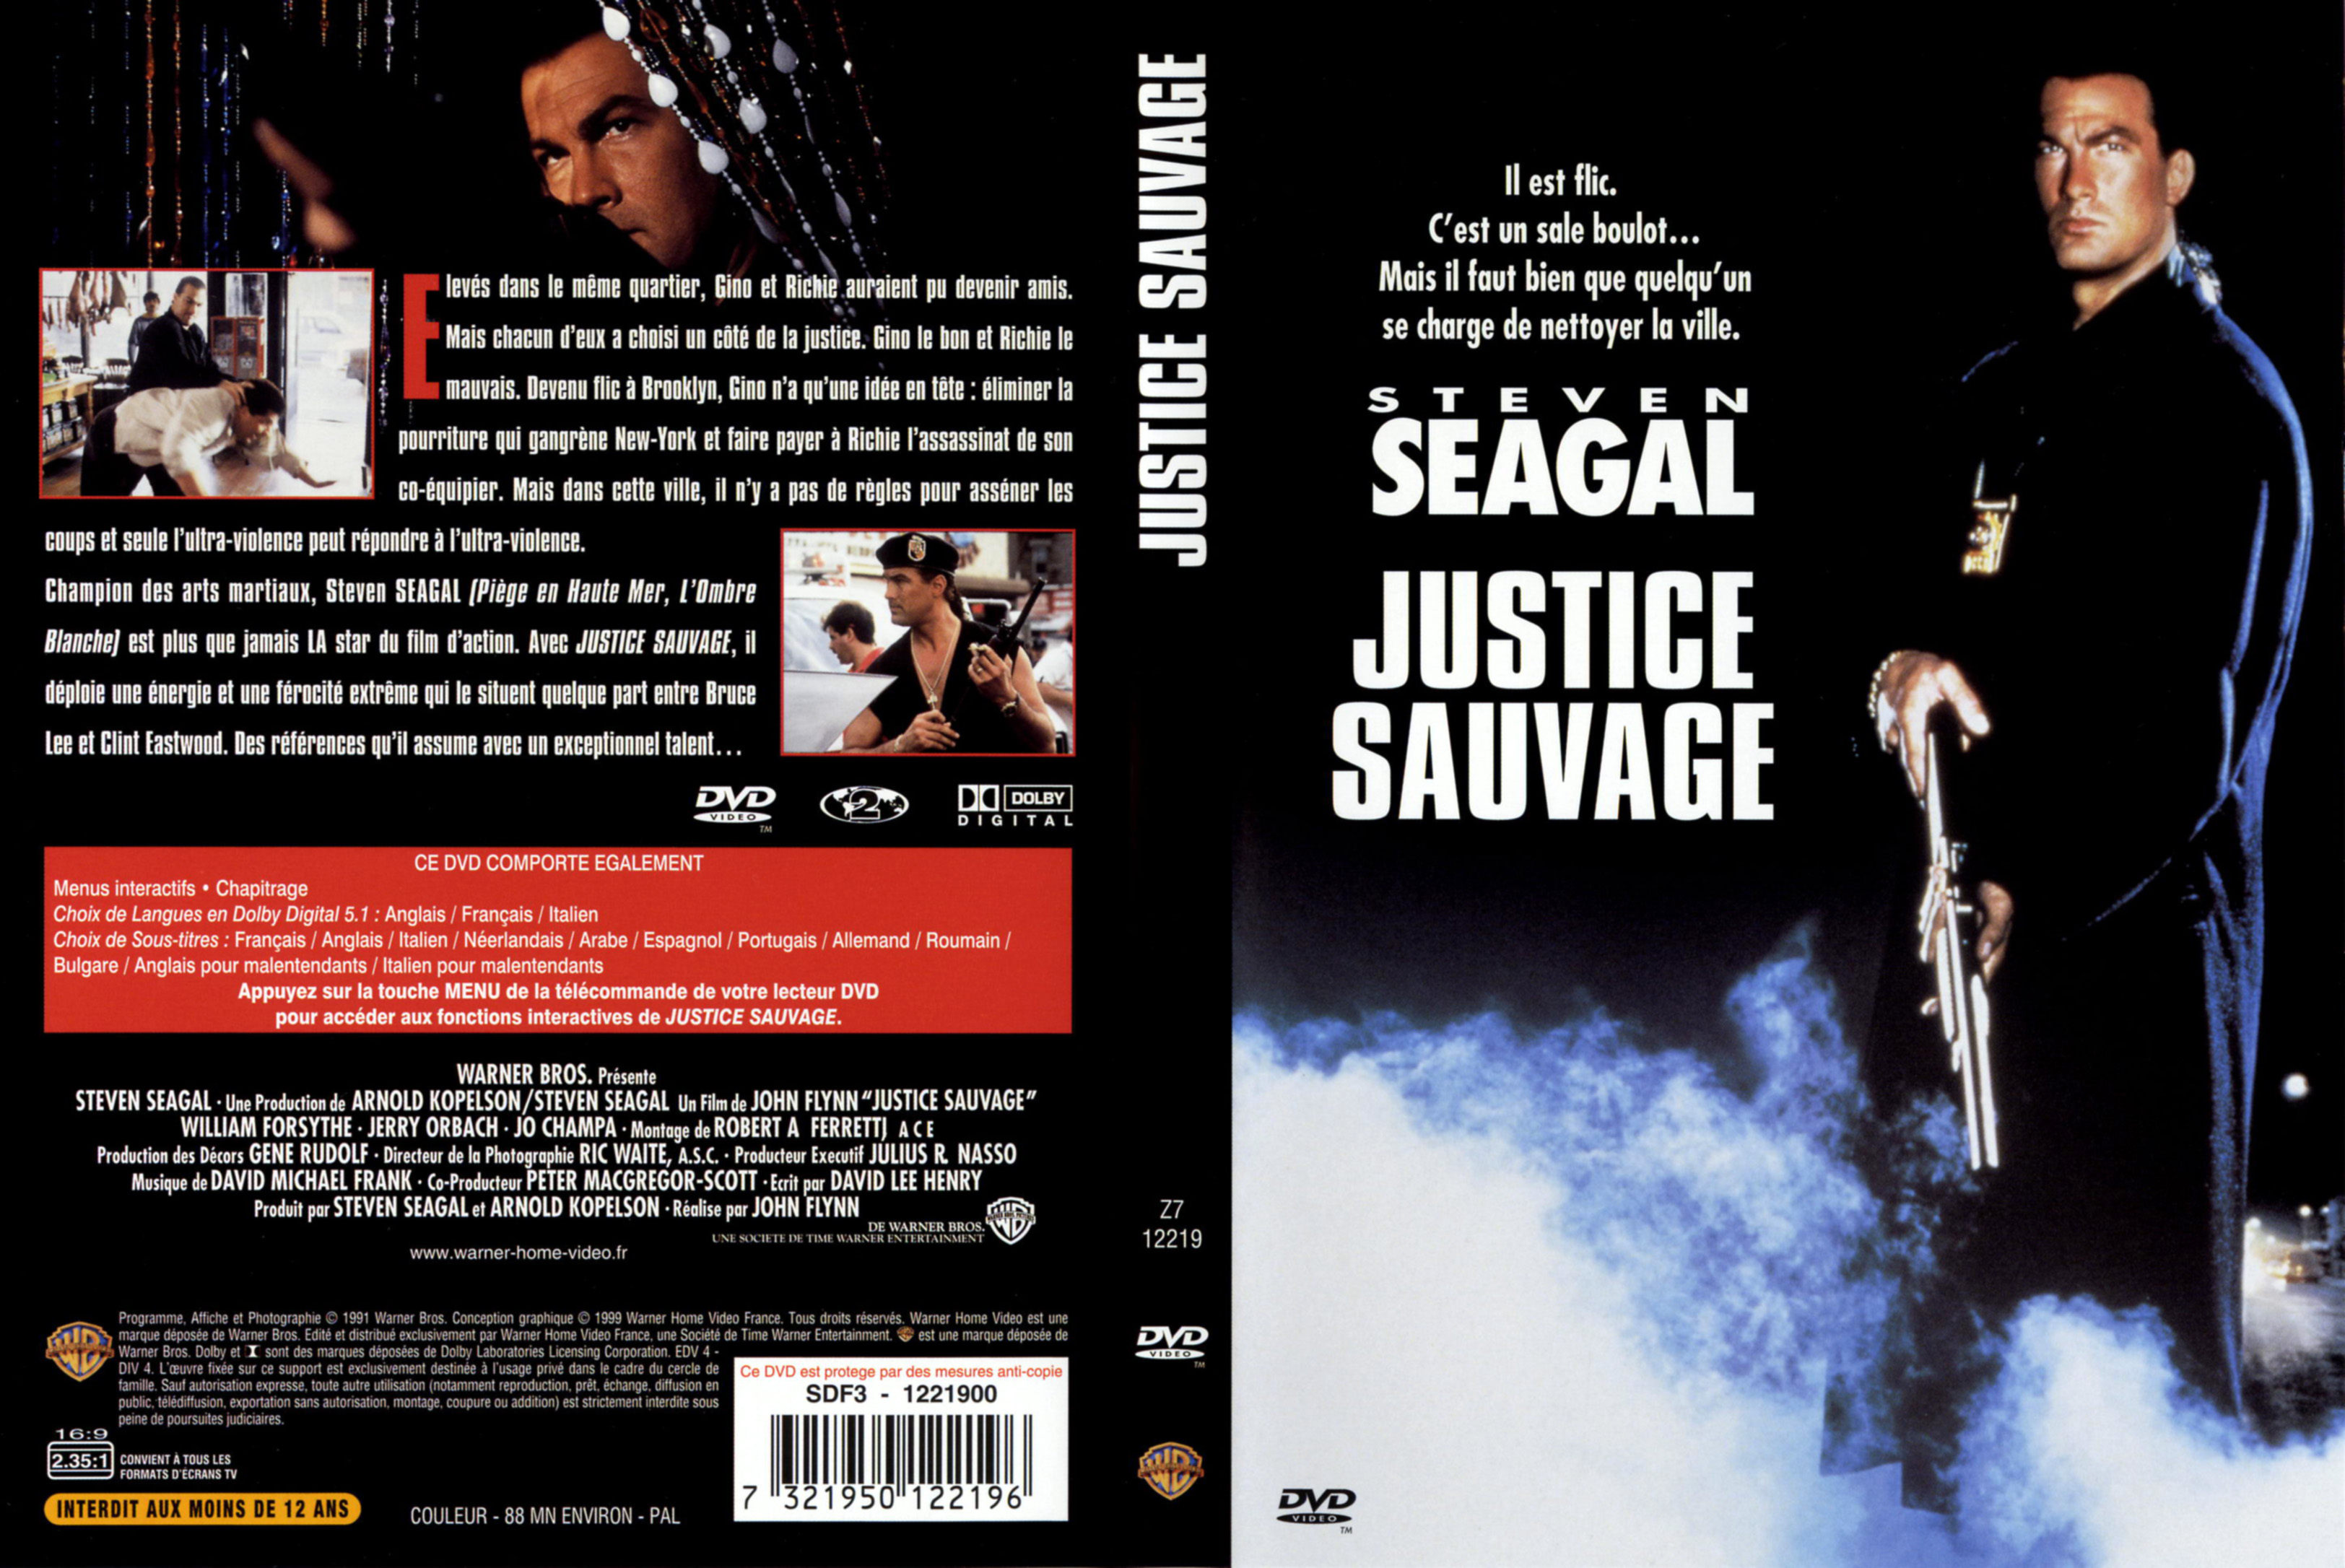 Jaquette DVD Justice sauvage